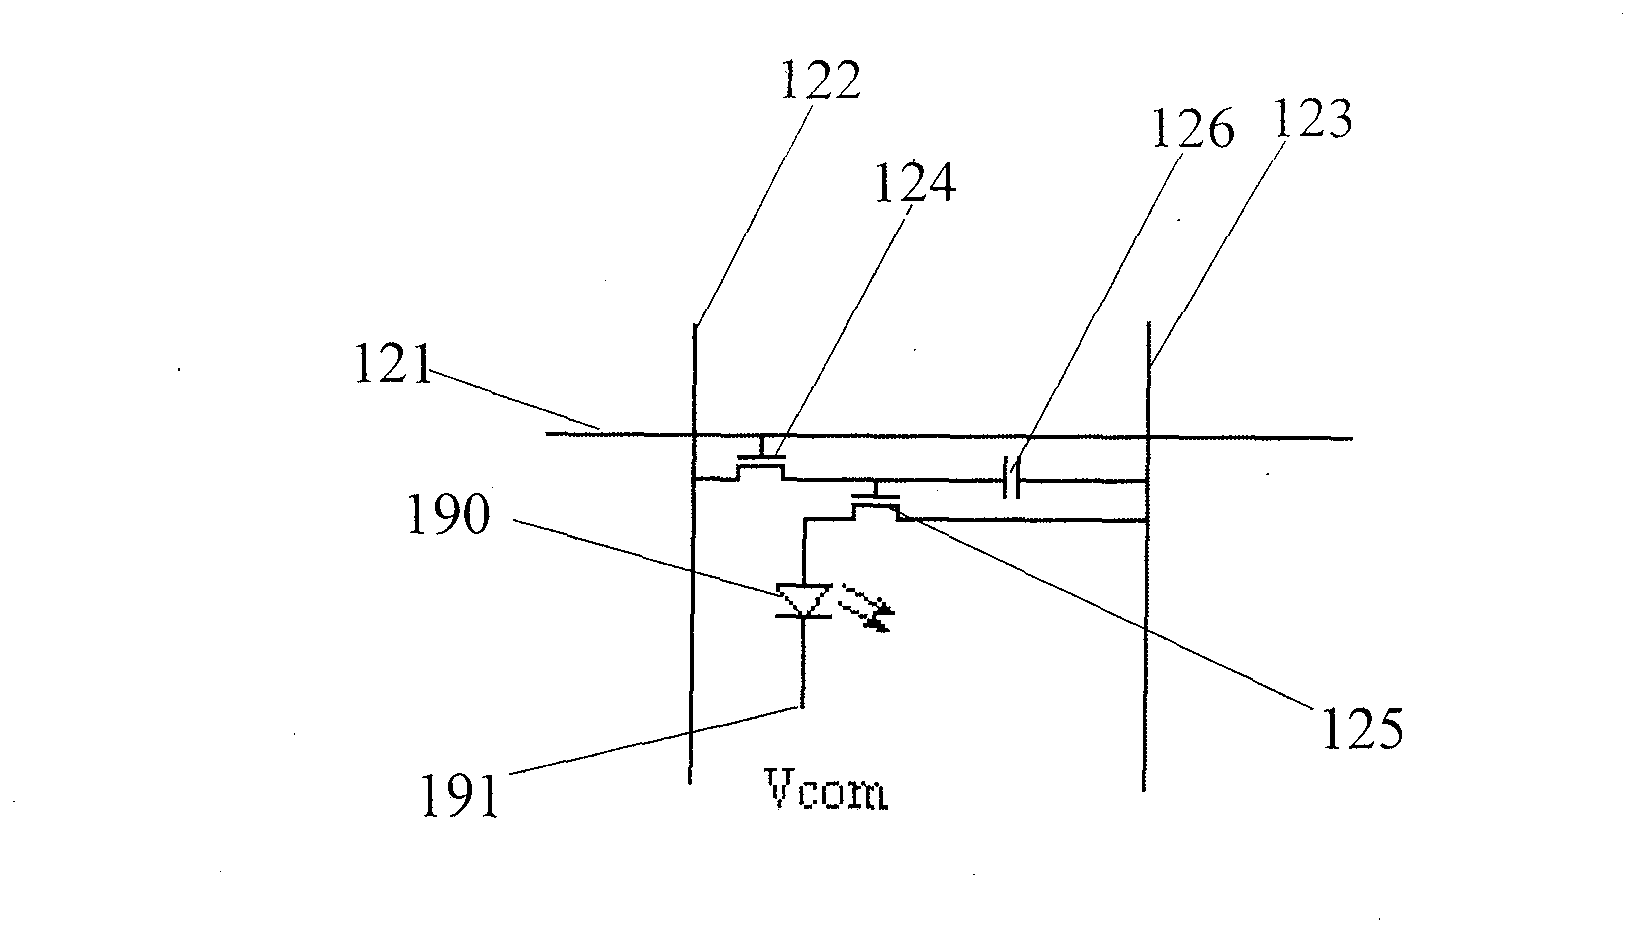 Organic light-emitting diode (OLED) display screen and touch detection unit